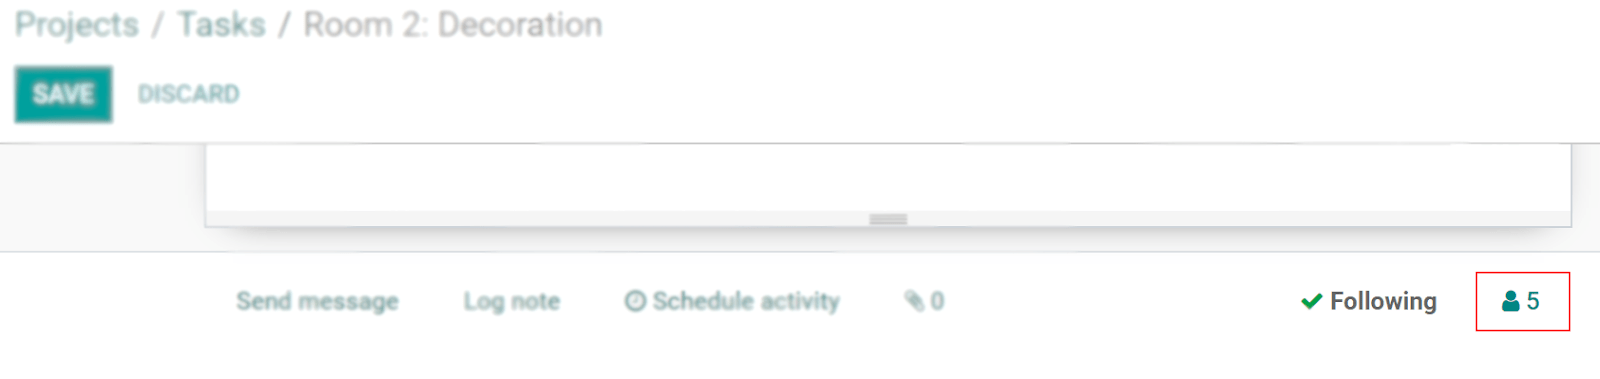 Click on the follower icon to add followers to a task in Odoo Project